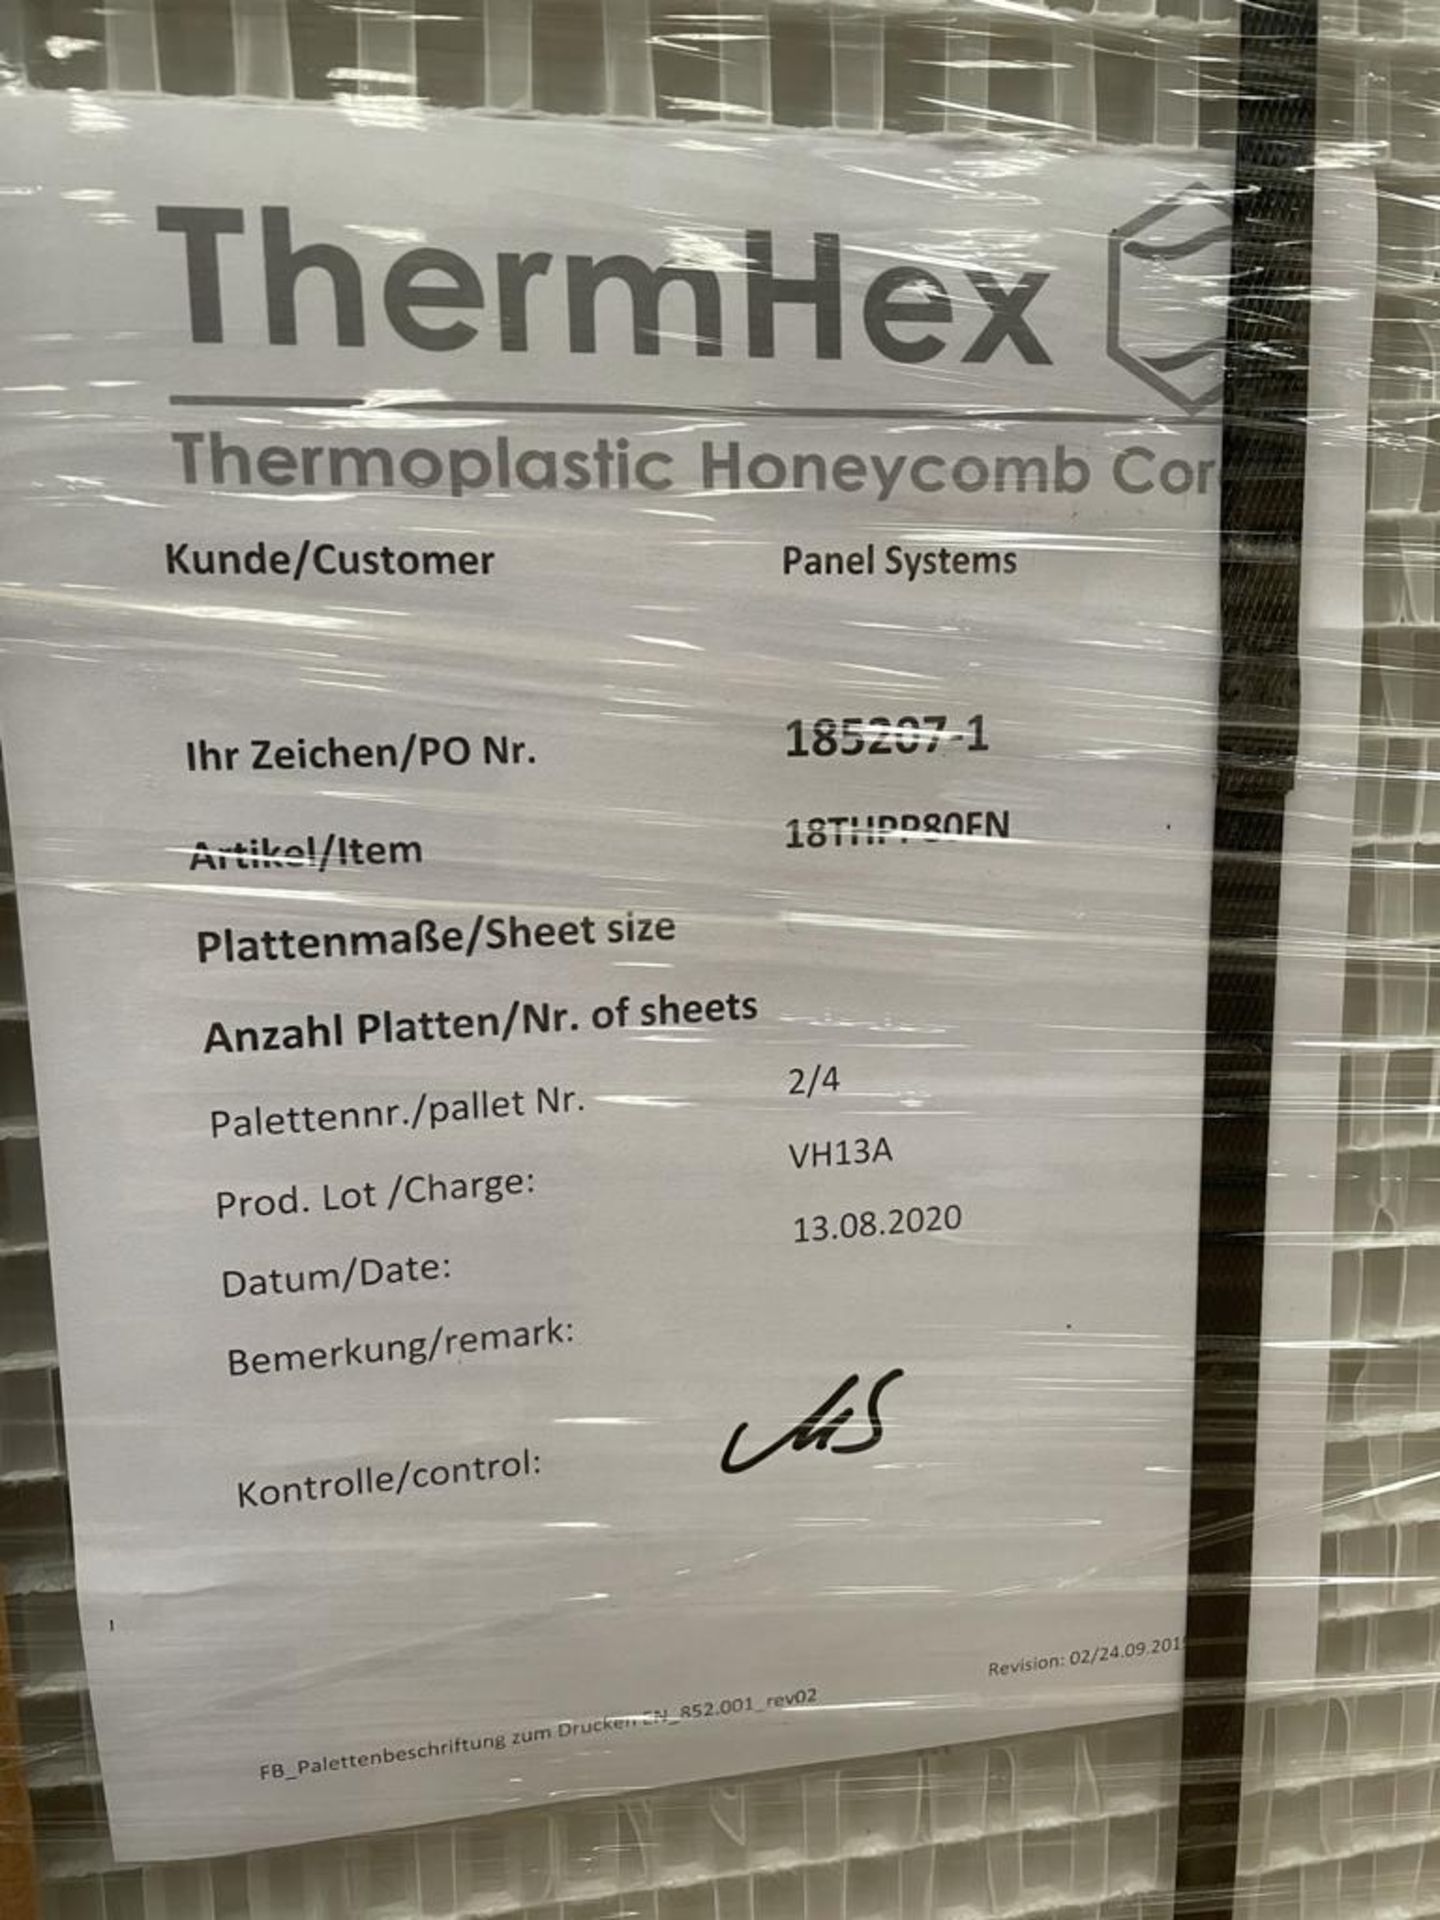 24 x ThermHex Thermoplastic Honeycomb Core Panels - Size 693 x 1210 x 18mm - New Stock - Lightweight - Image 2 of 8